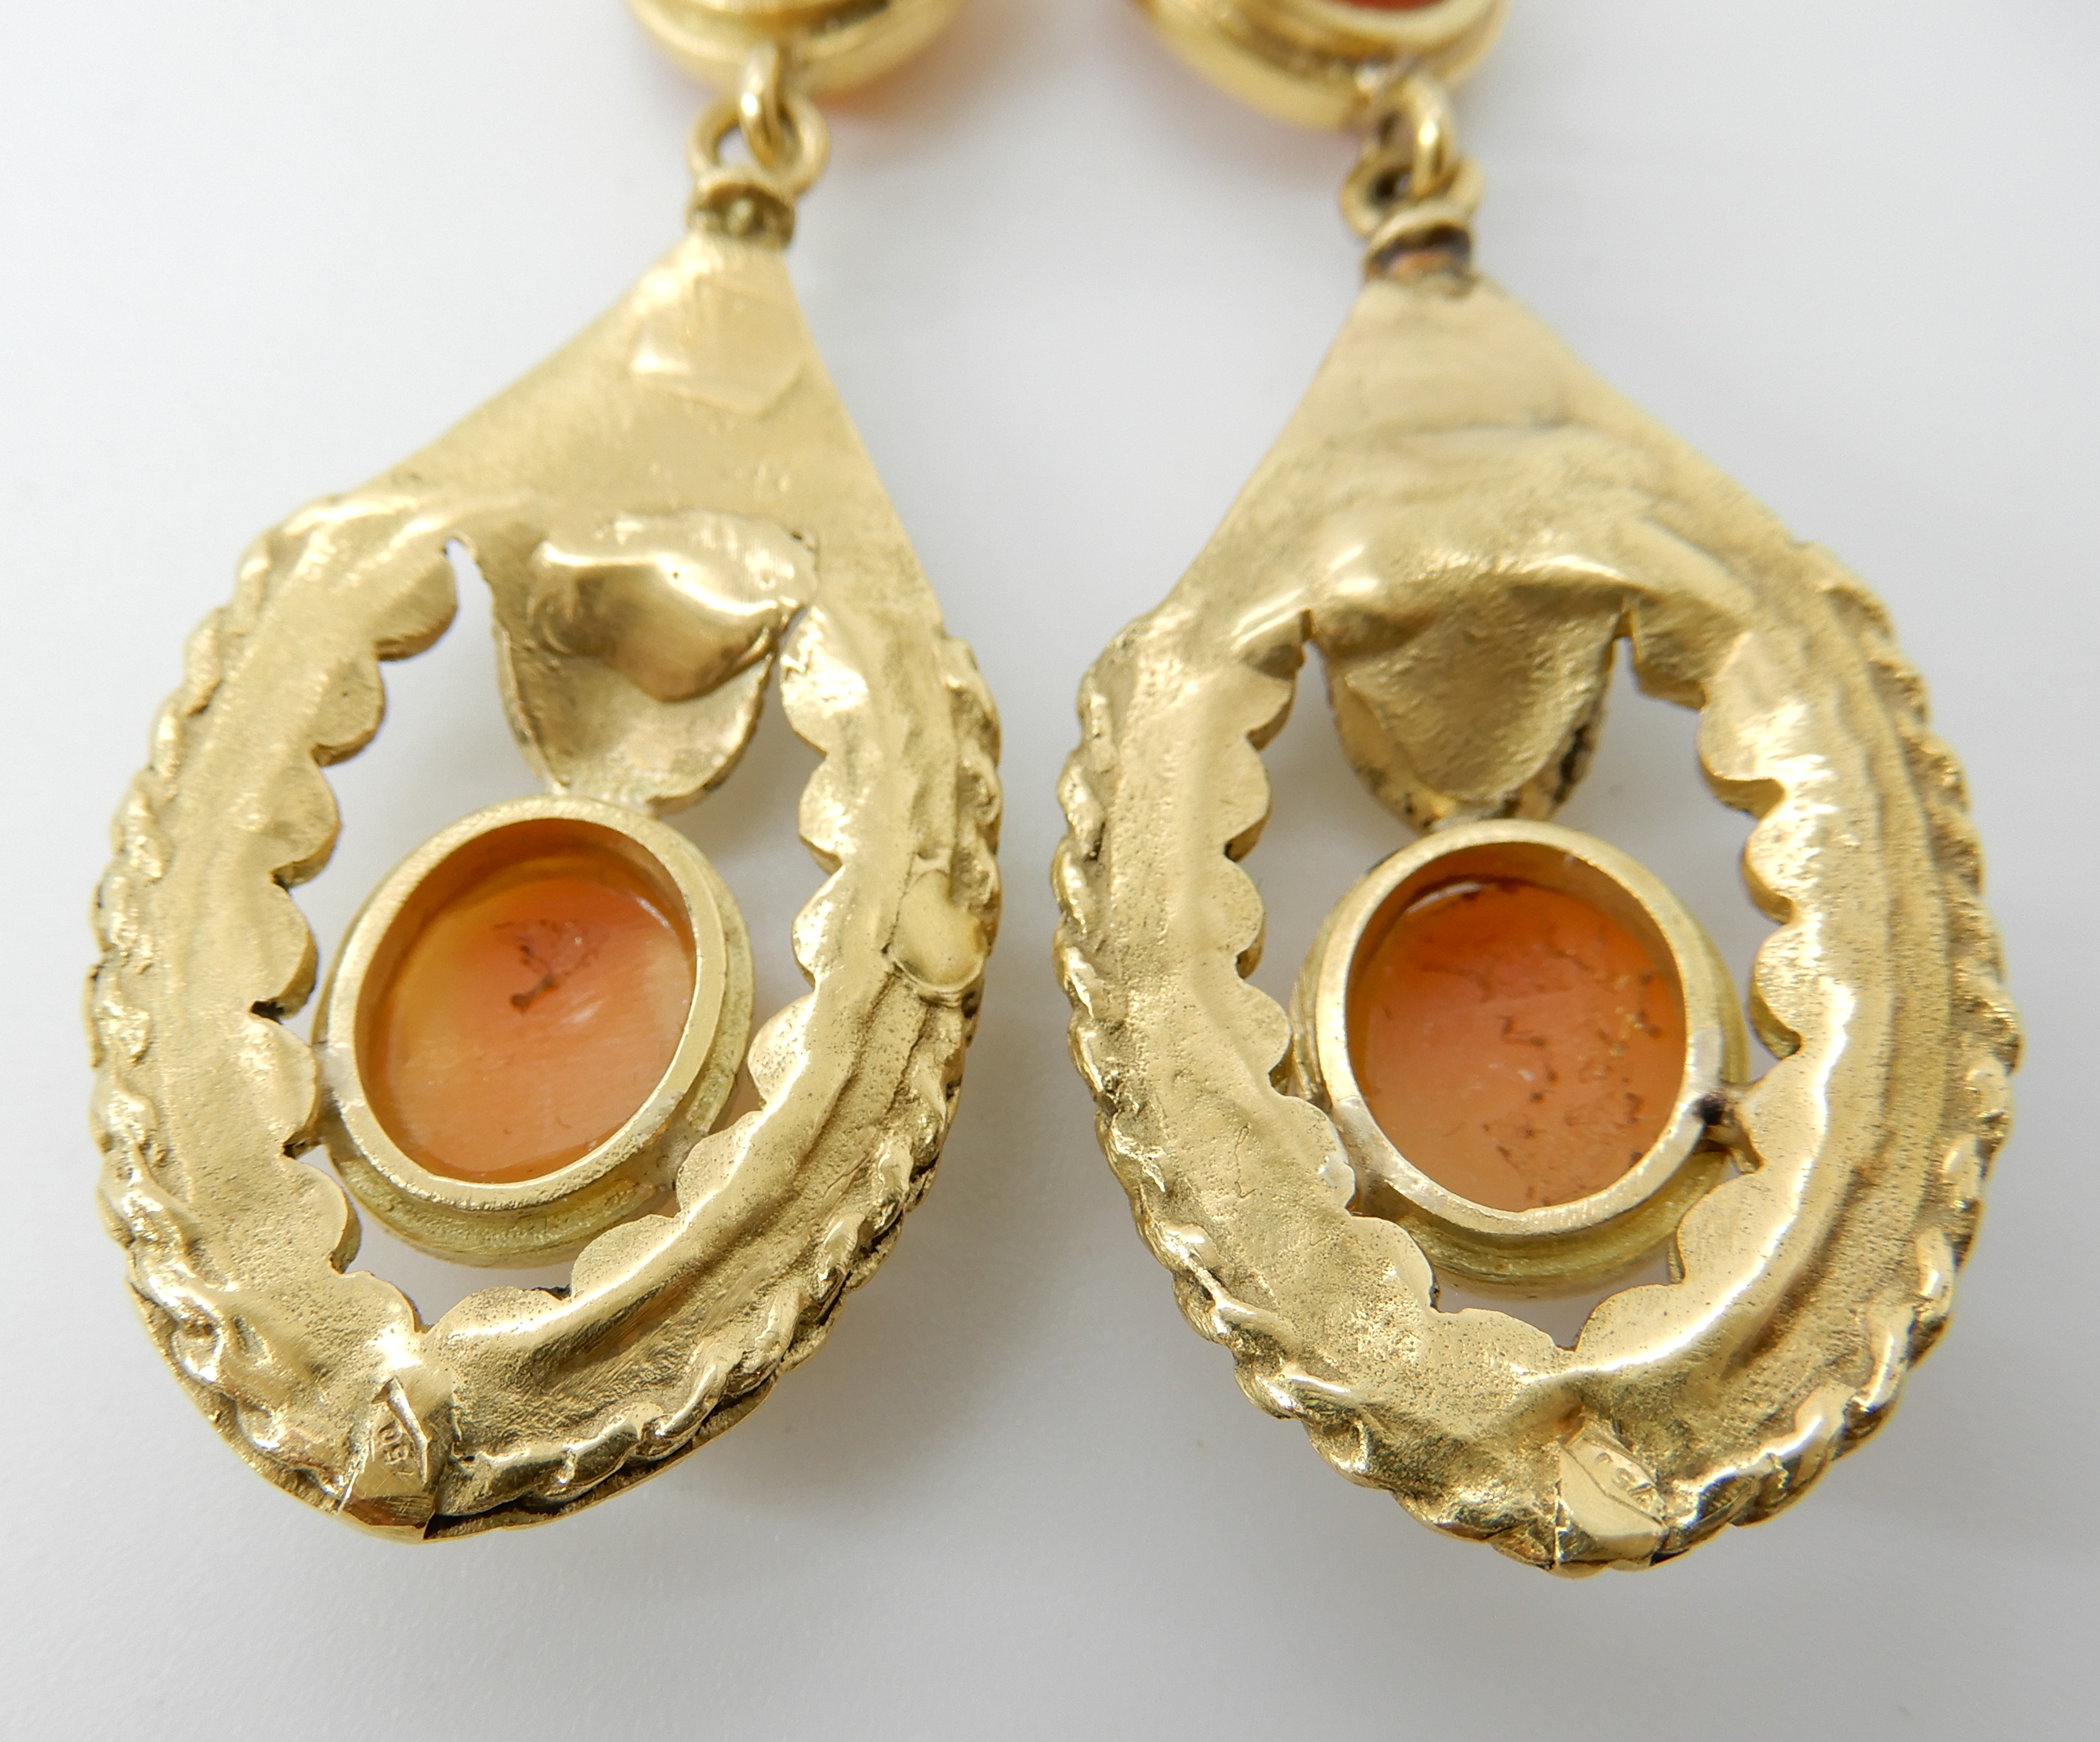 A PAIR OF 18CT GOLD CAMEO EARRINGS with decorative mounts, post and butterfly fitting. Stamped 750 - Image 4 of 4